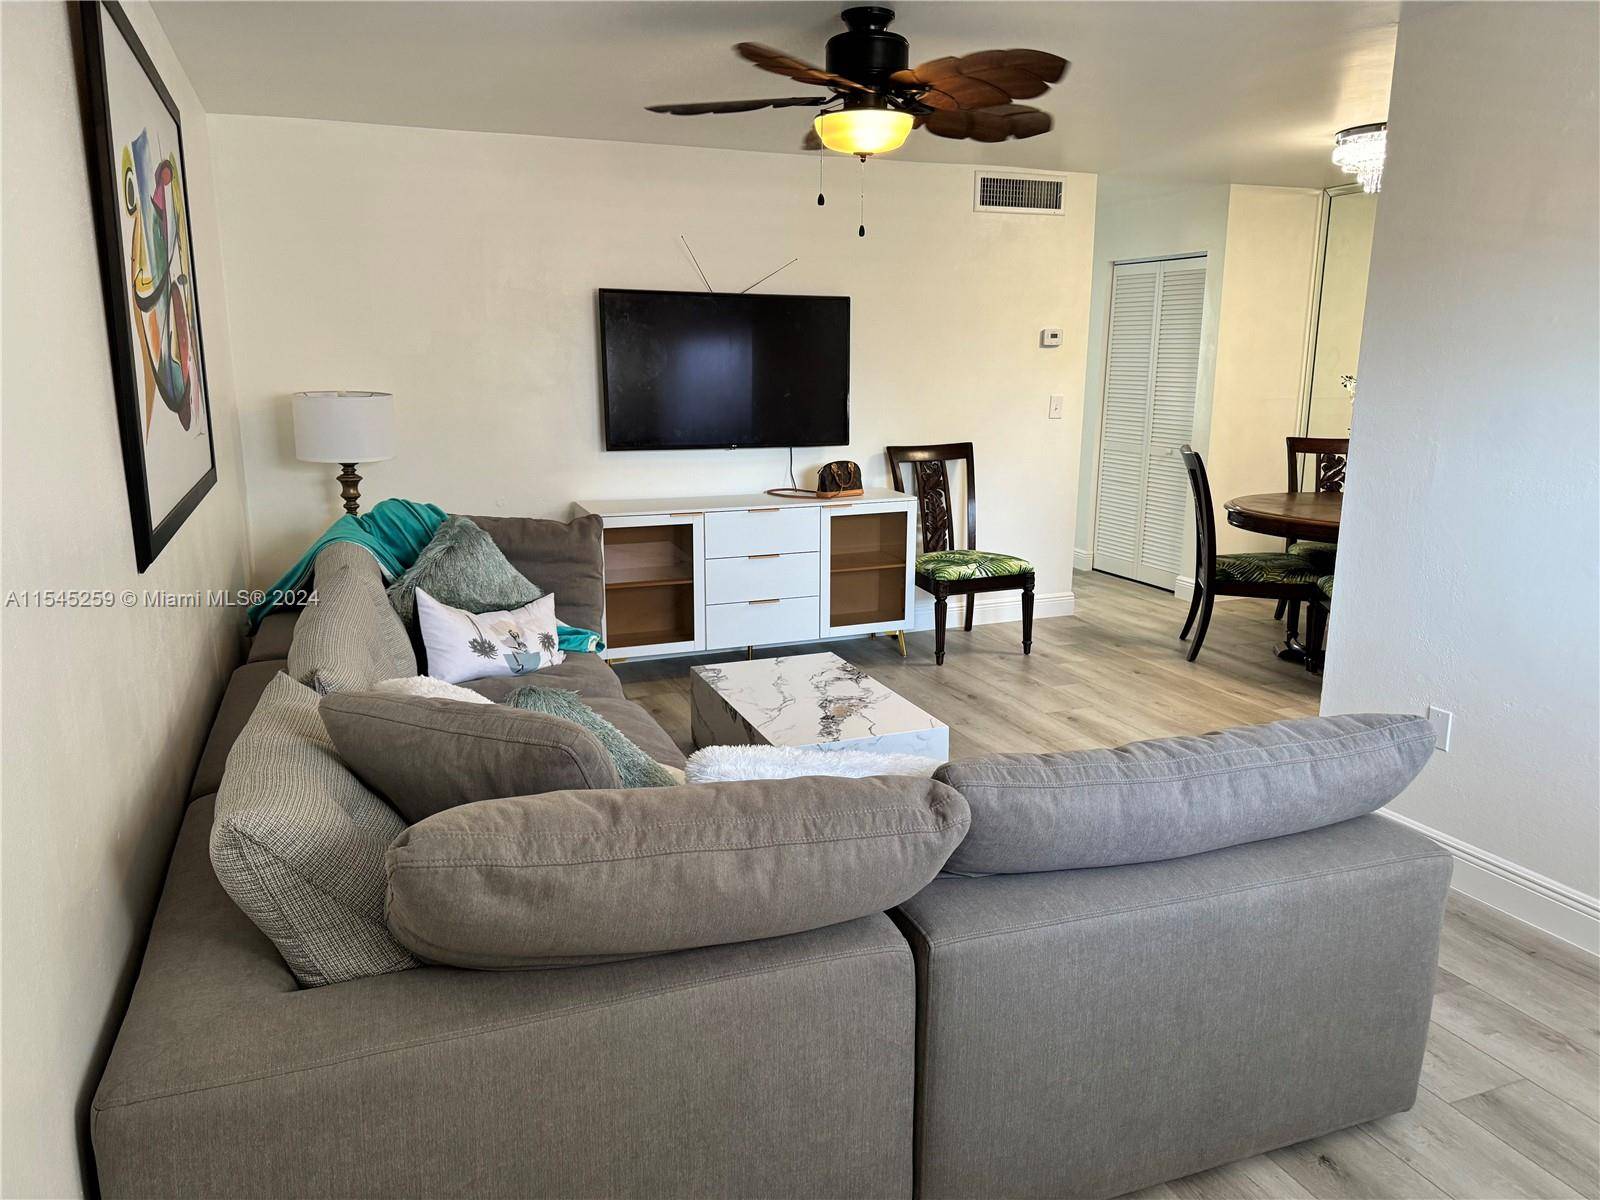 WELCOME HOME, to this lovely, cozy 1 bedroom 1 bathroom condo in a very sought after neighborhood in Miami Beach SOUTH OF 5TH !